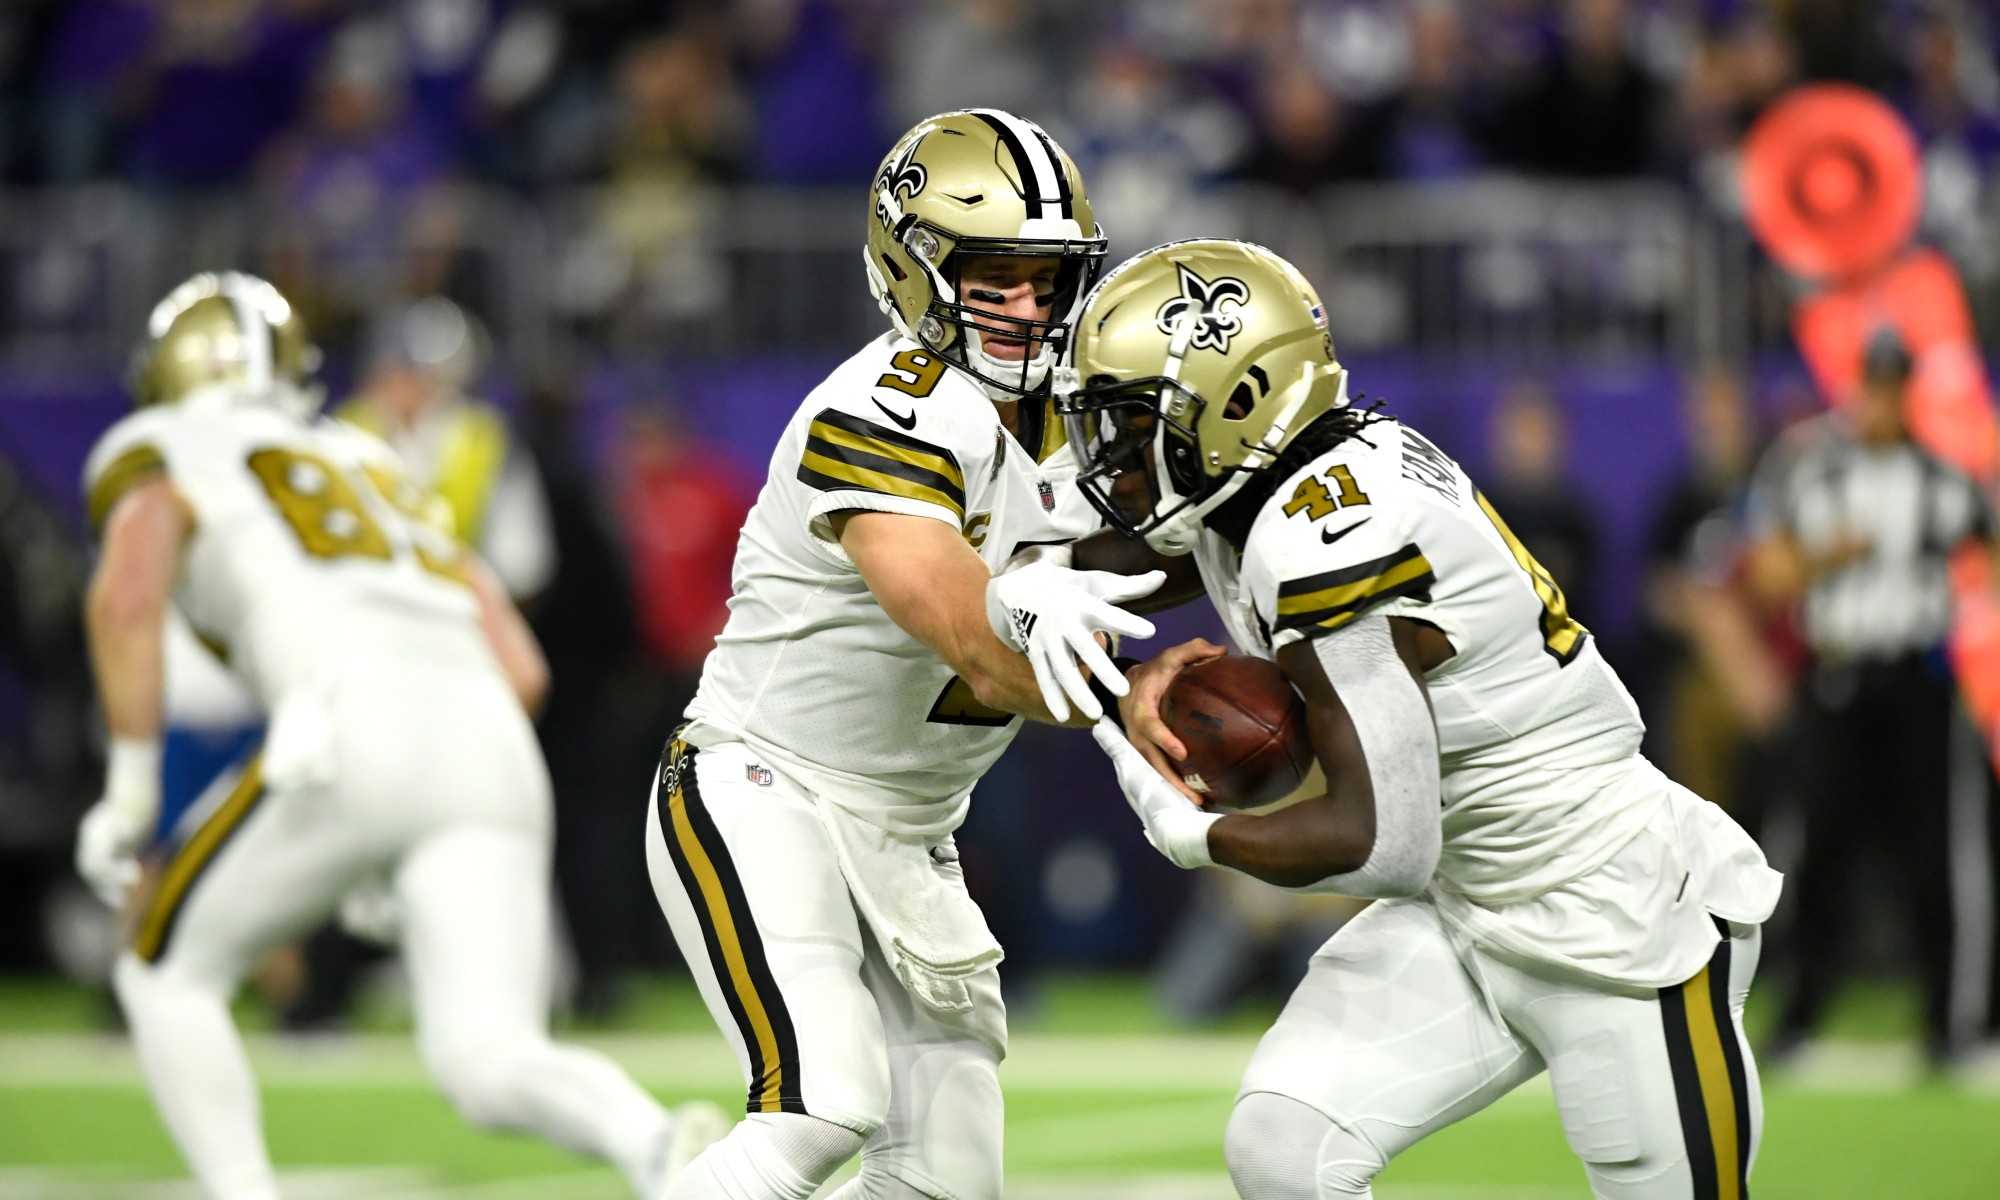 PFF Saints at the top of projected fantasy football power rankings